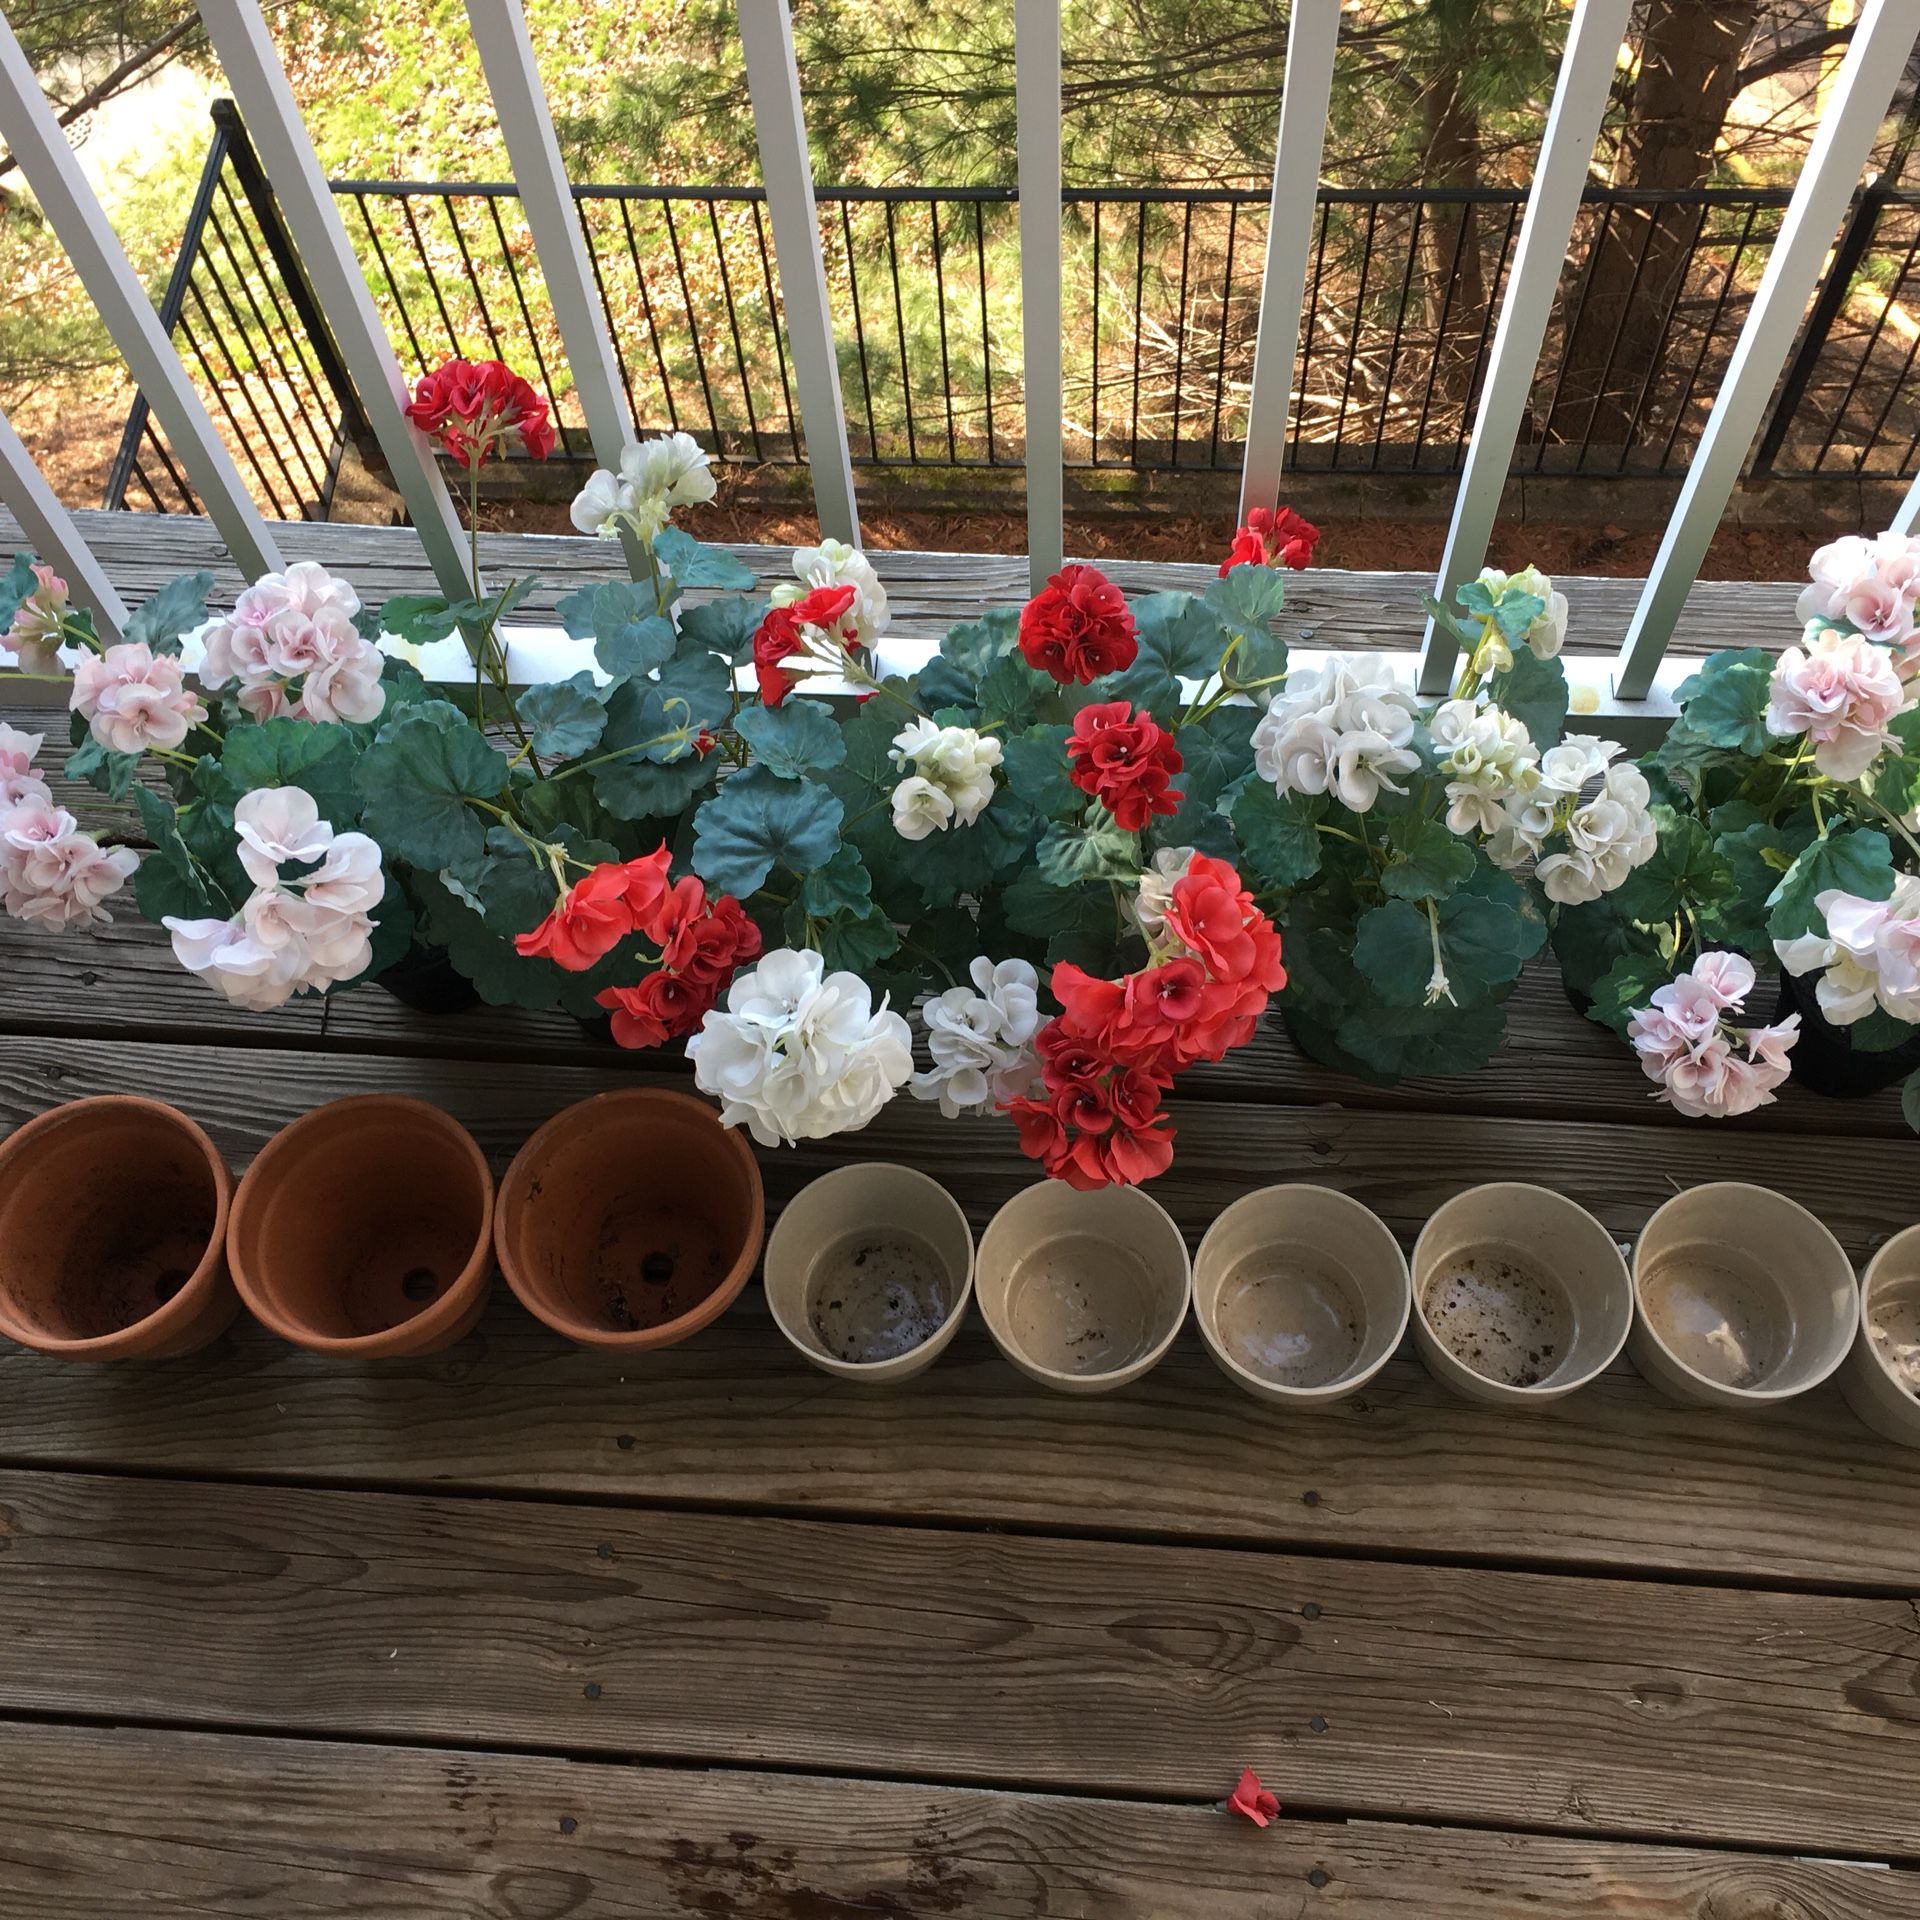 FREE IKEA Plastic flowers and clay pots